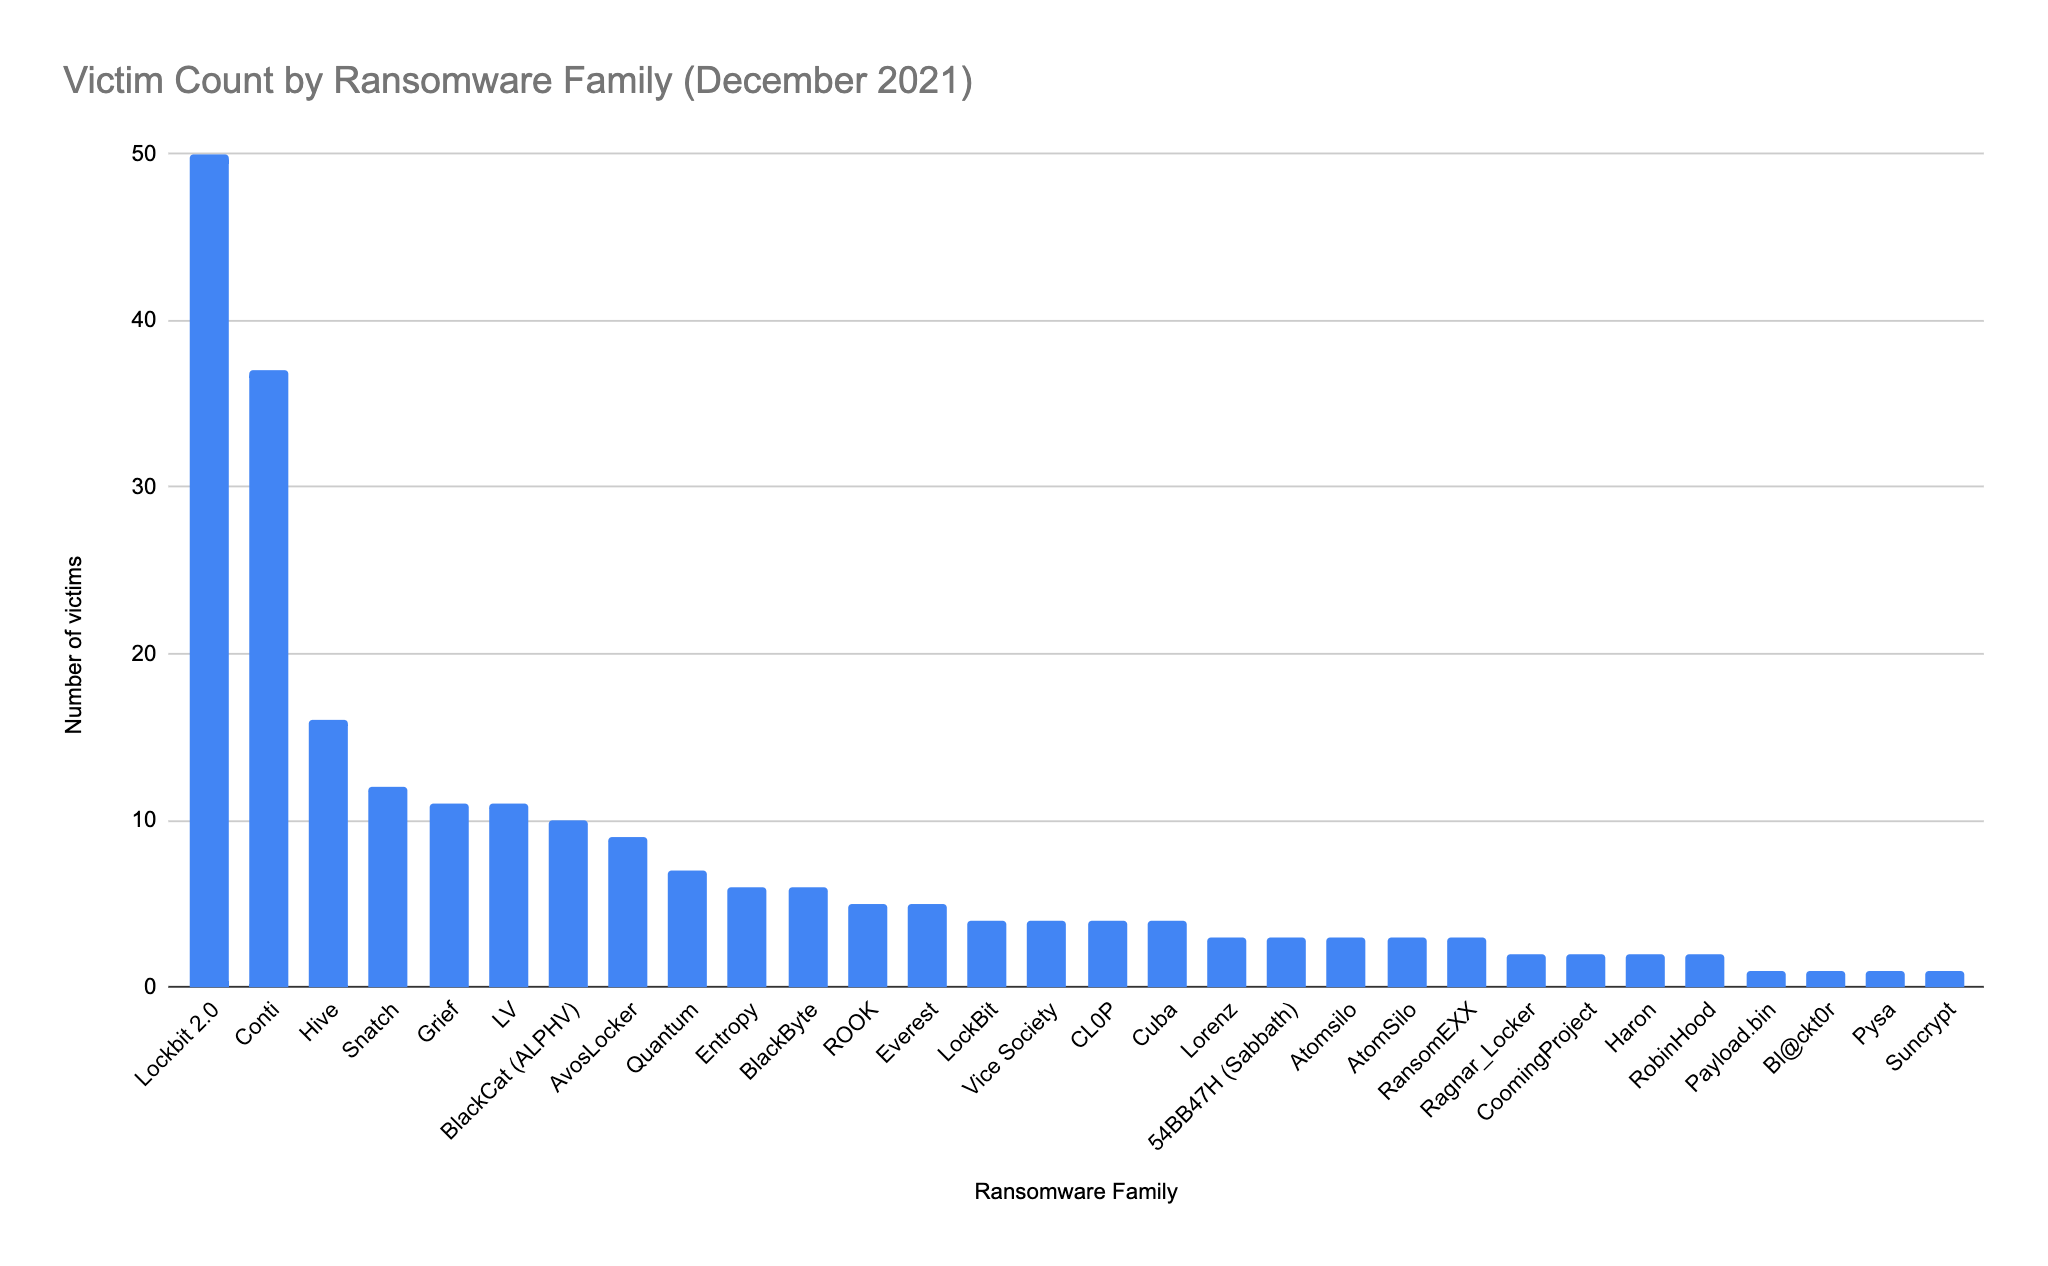 Victim count by ransomware family, December 2021, based on information captured from leak sites/name and shame blogs. Top ransomware families ordered by numbers of victims: Lockbit 2.0, Conti, Hive, Snatch, Grief, LV, BlackCat ransomware (ALPHV), AvosLocker, Quantum, Entropy, BlackByte, ROOK, LockBit, Vice Society, CLDP, Cubs, Lorenz, Sabbath, Atomsilo, AtomSilo, RansomEXX, RagnarLocker, etc.